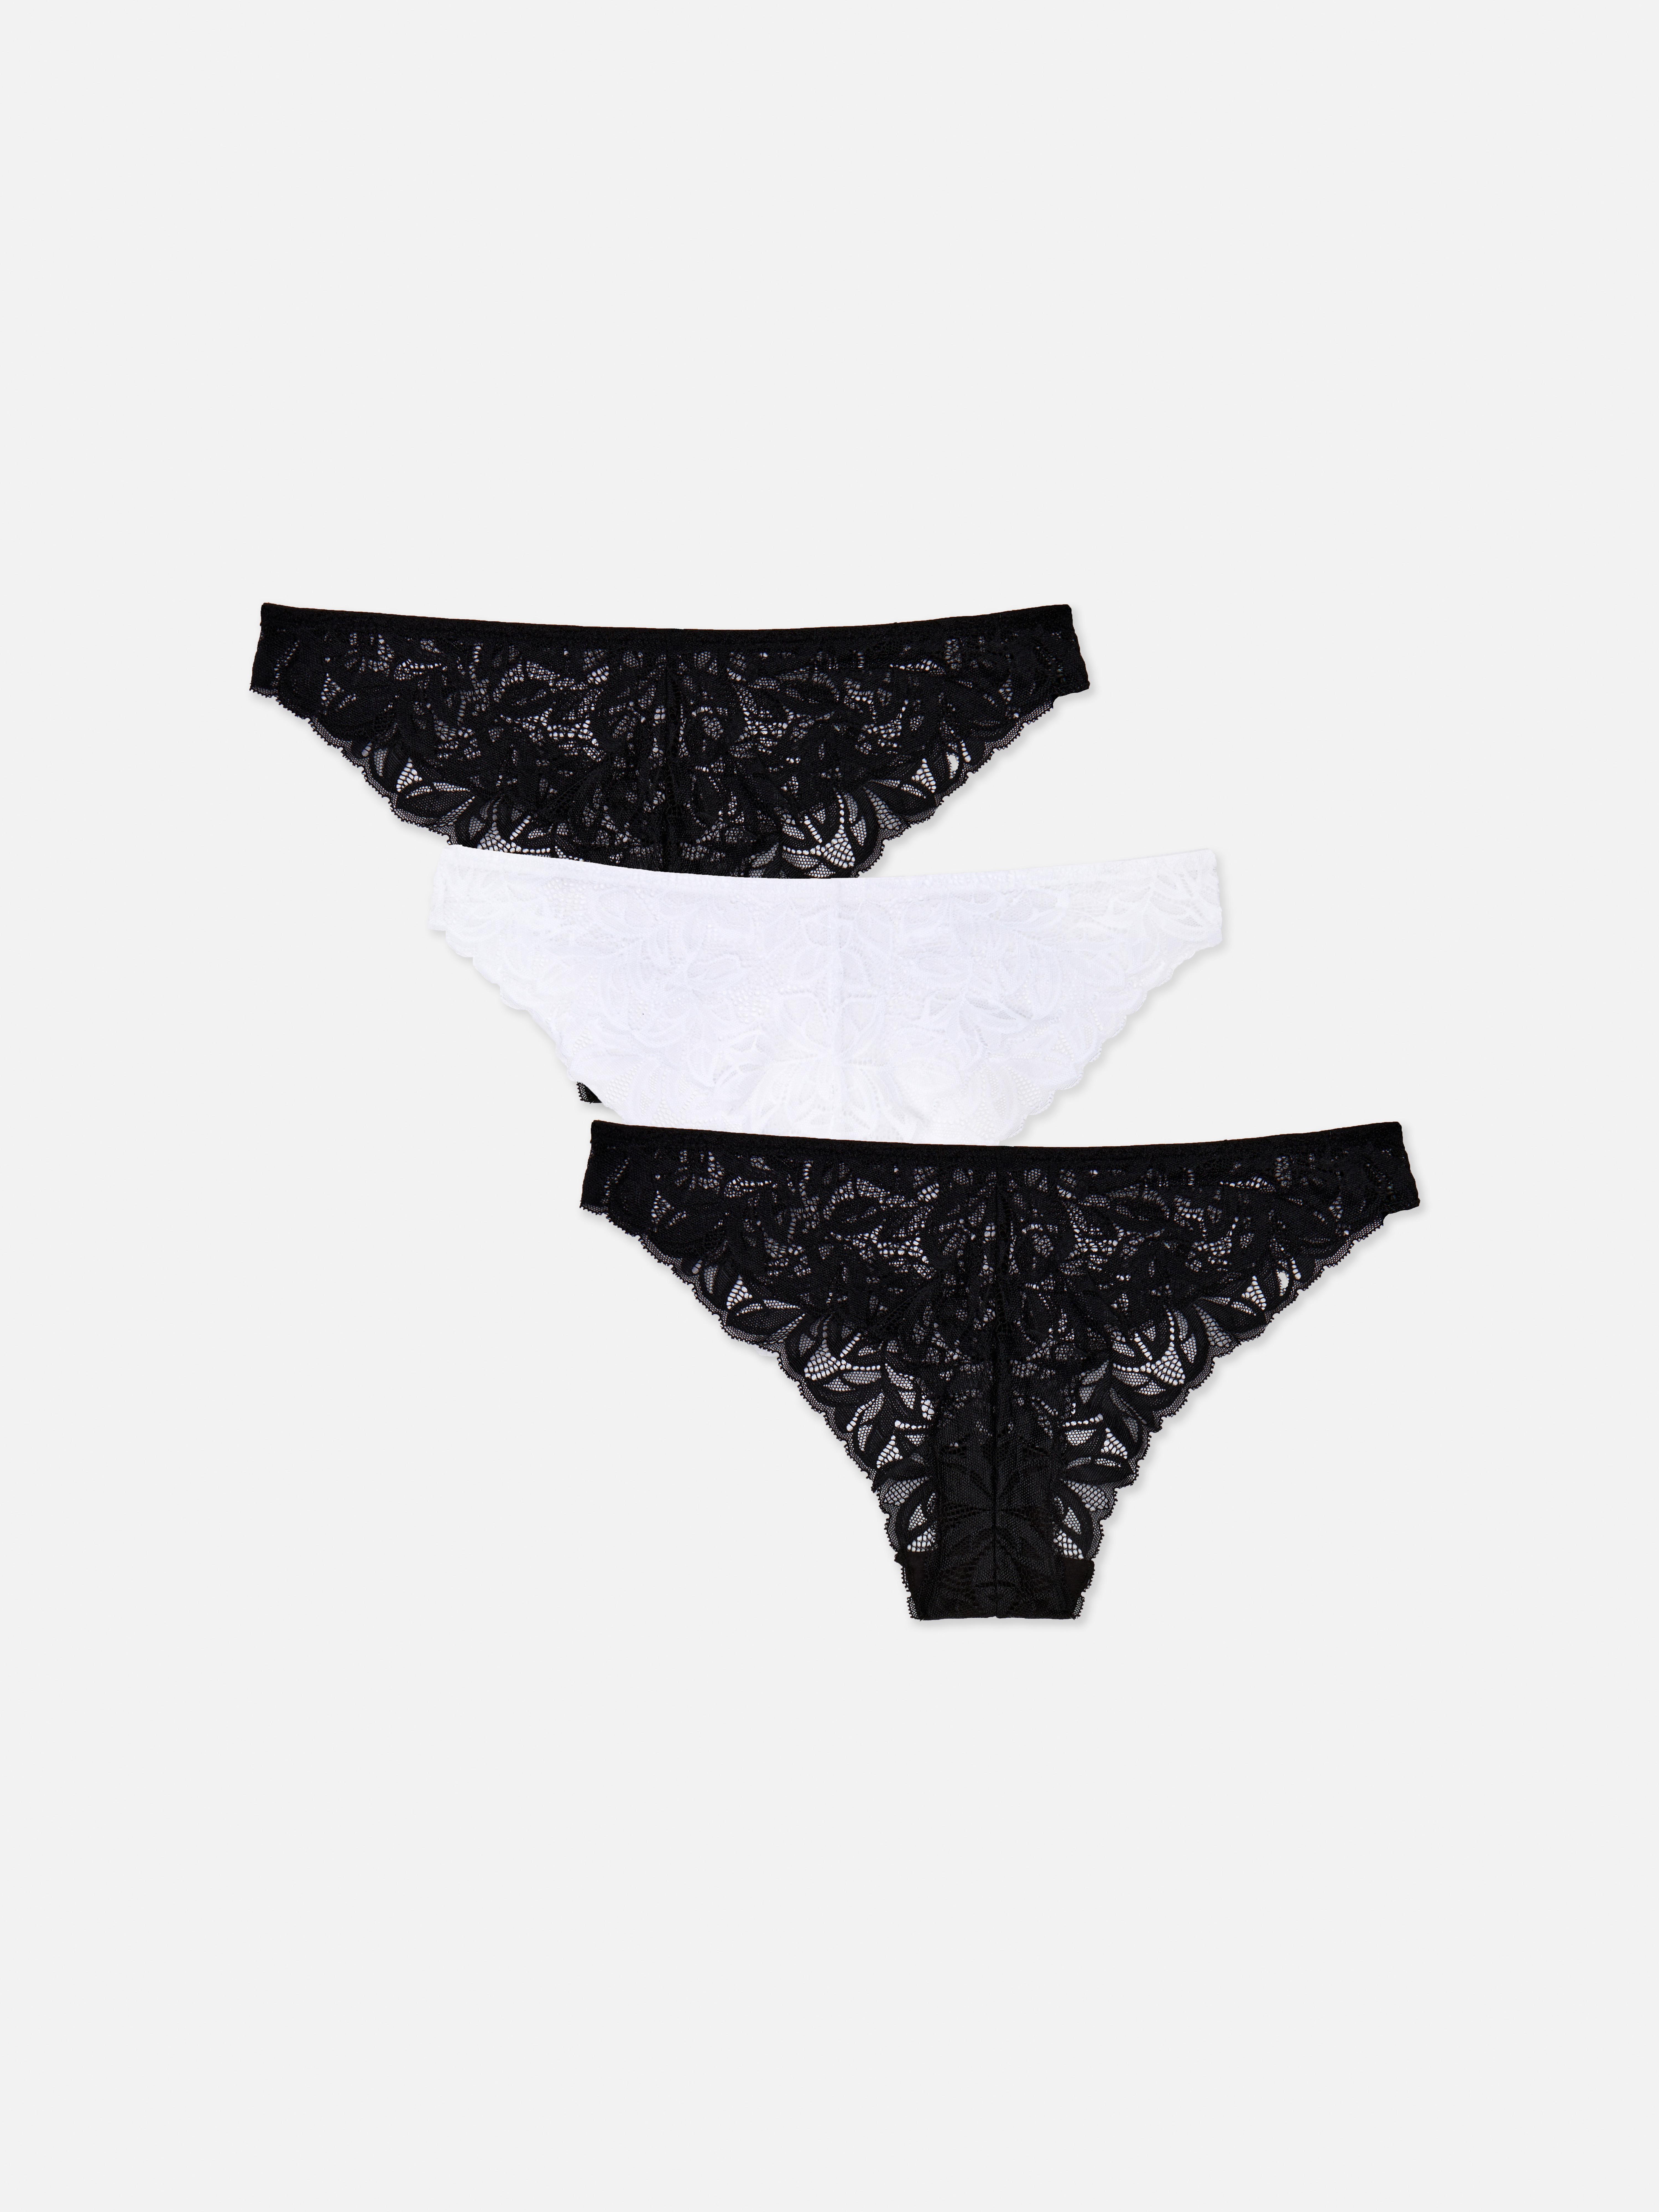 Primark on X: Sweet new additions for the underwear drawer